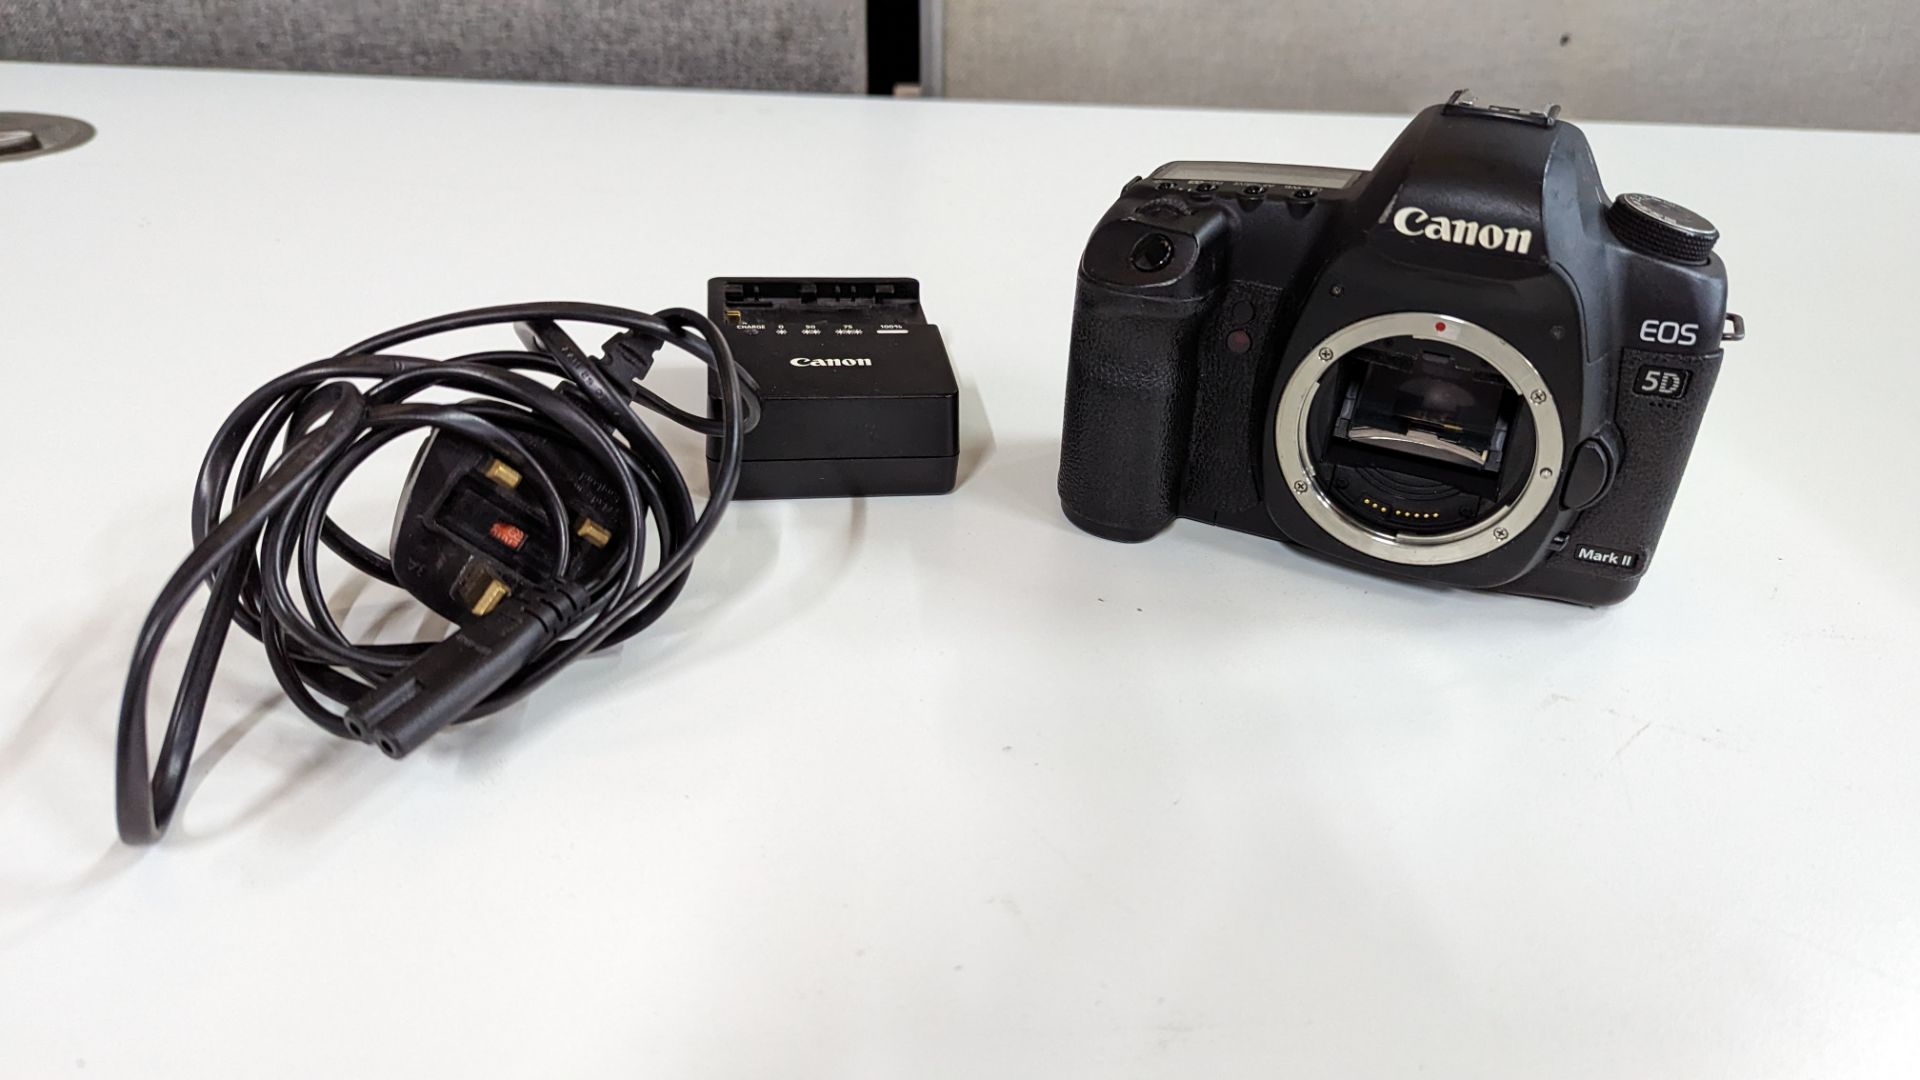 Canon EOS 5D Mark II digital camera plus Canon battery charger. N.B. no lens or battery included wi - Image 4 of 11